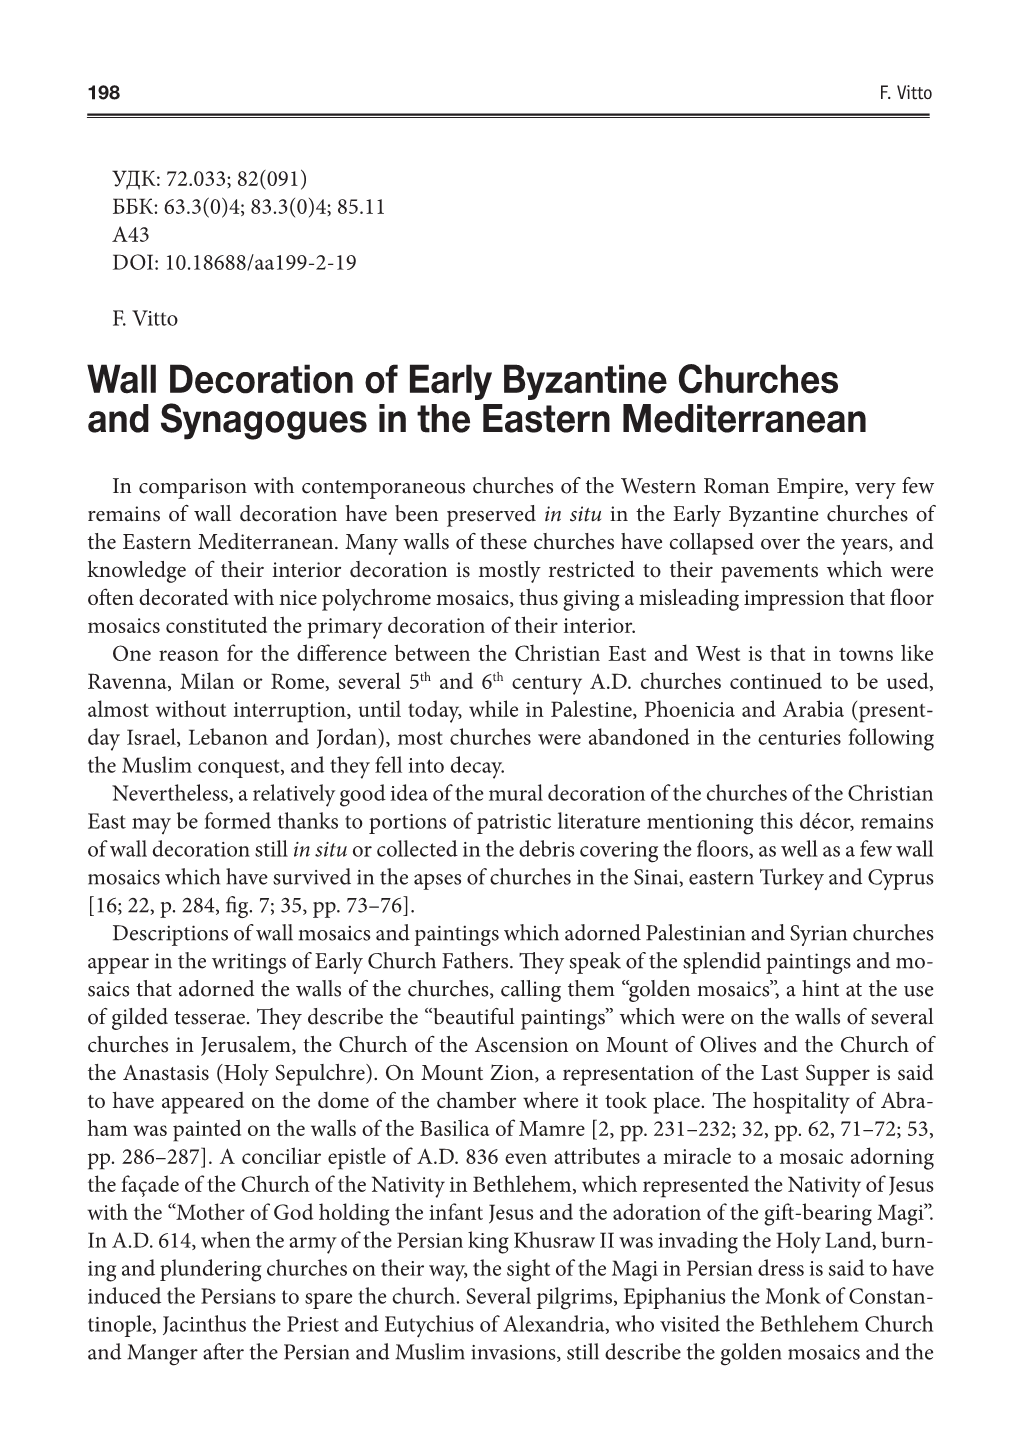 Wall Decoration of Early Byzantine Churches and Synagogues in the Eastern Mediterranean